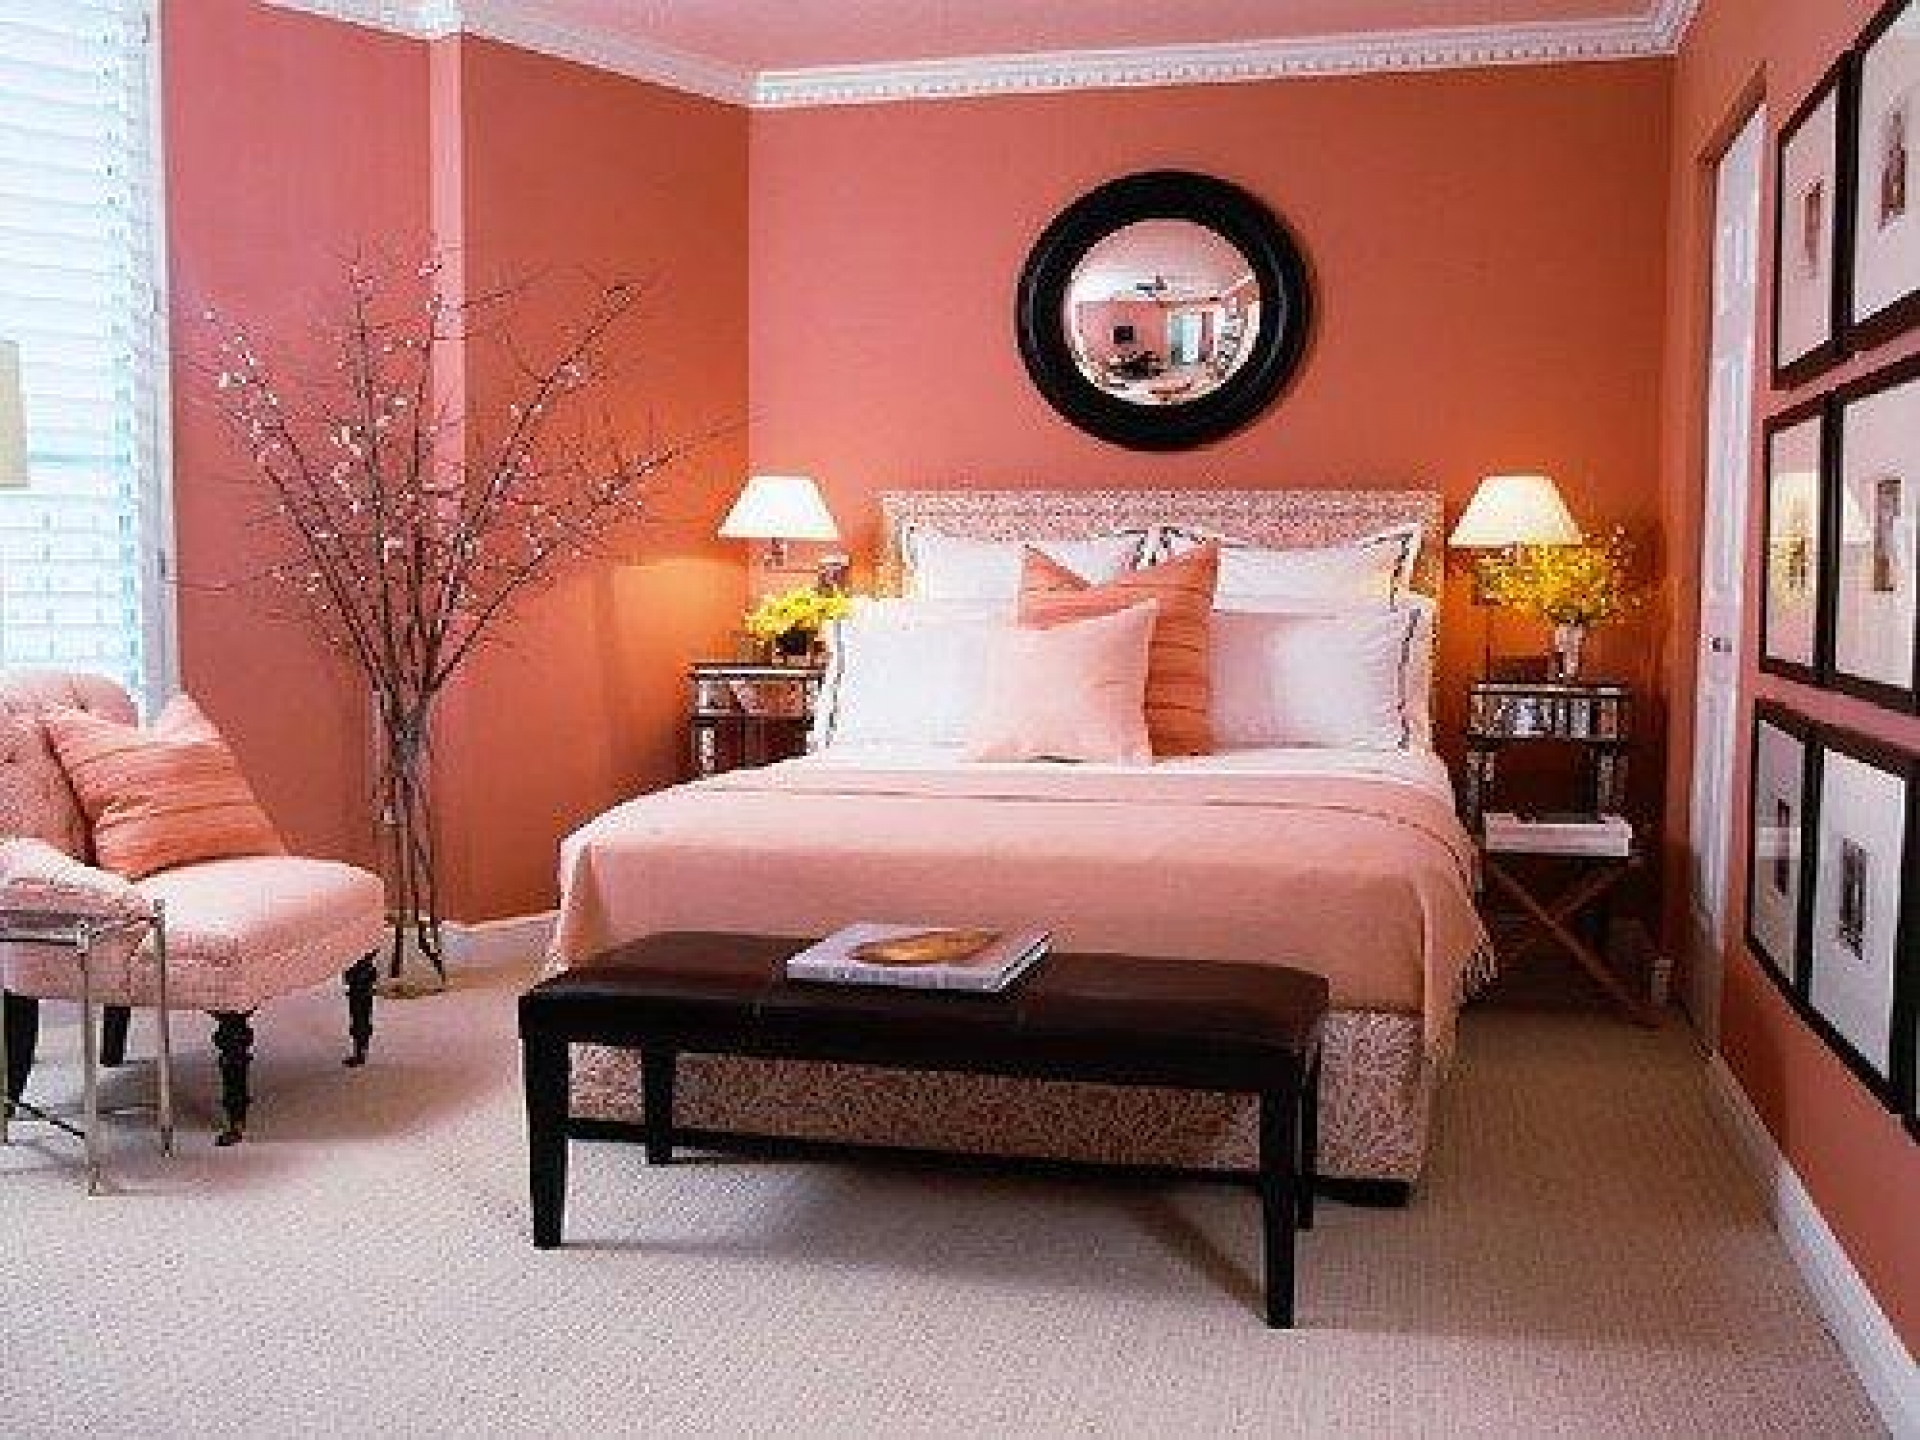 25 Beautiful Bedroom Ideas For Your Home The WoW Style